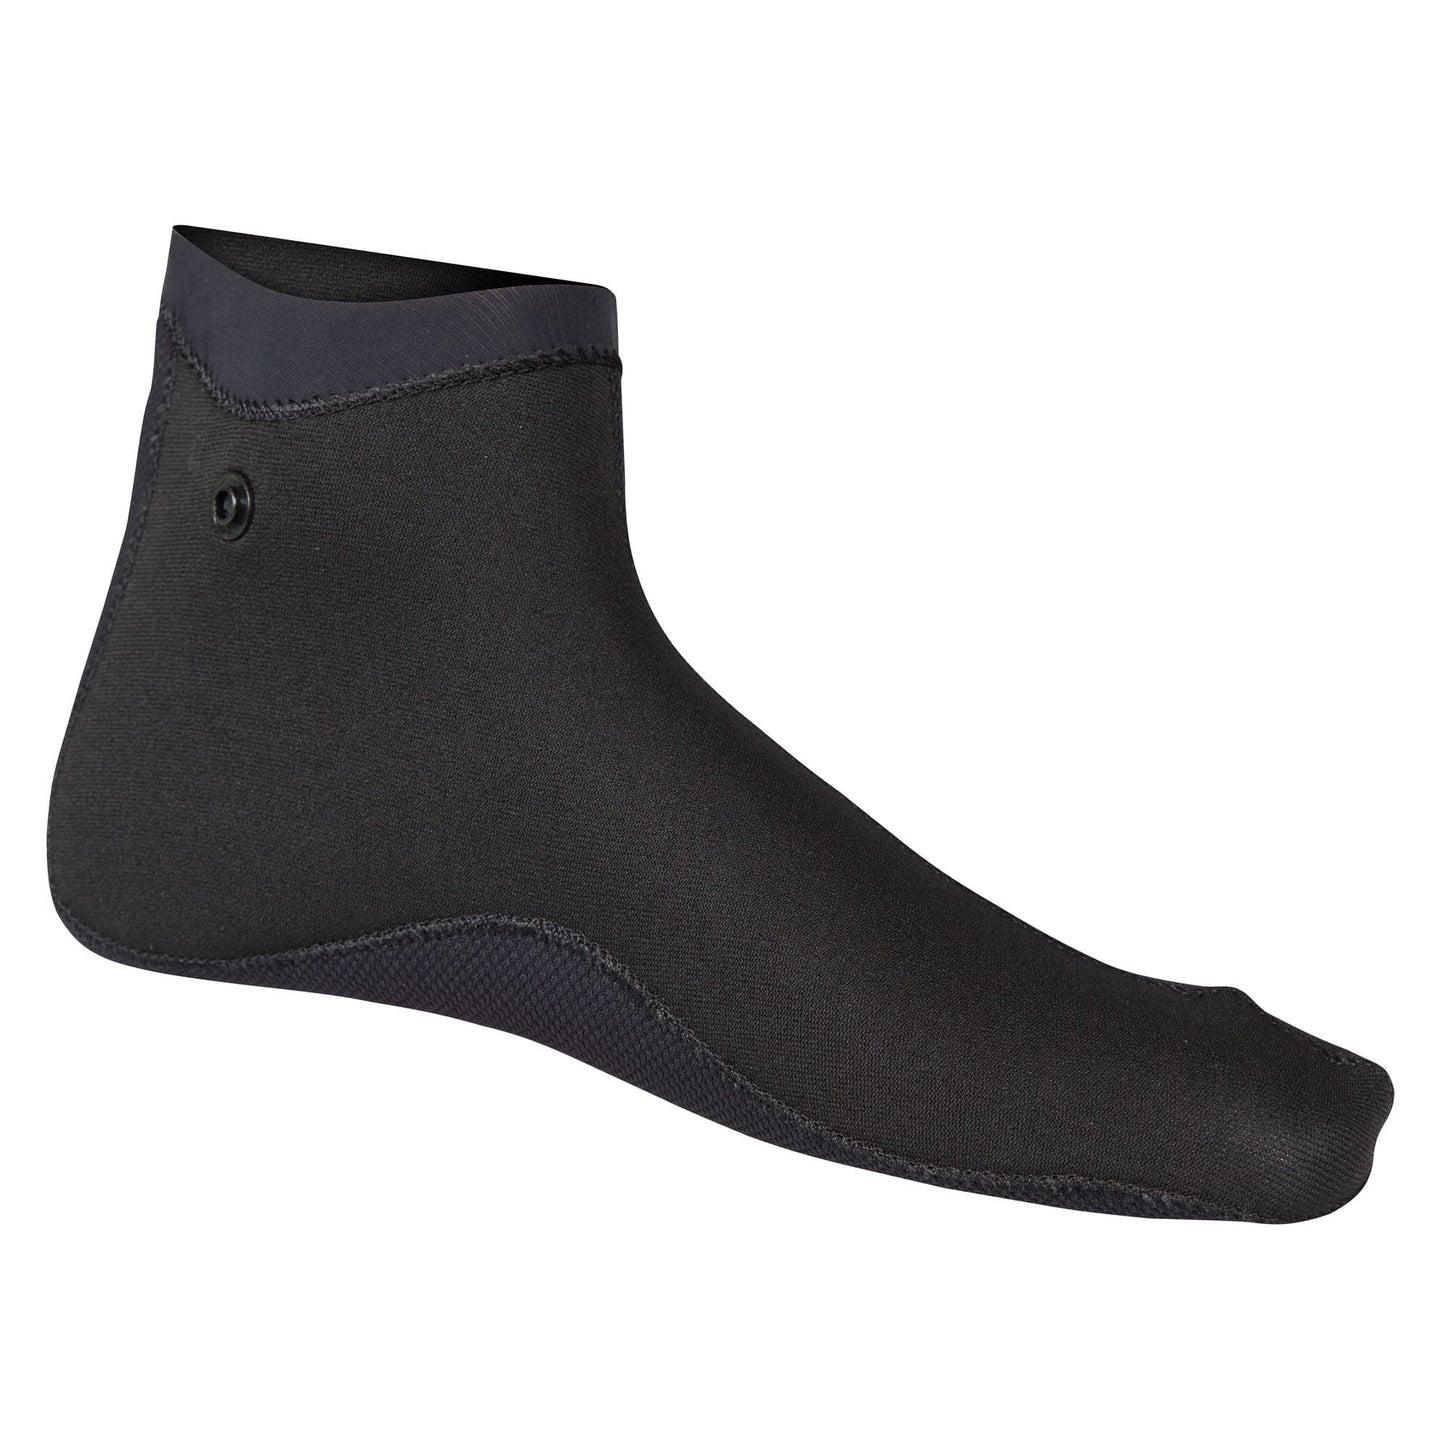 Featuring the Sandal Wet Sock men's footwear, women's footwear manufactured by NRS shown here from a second angle.